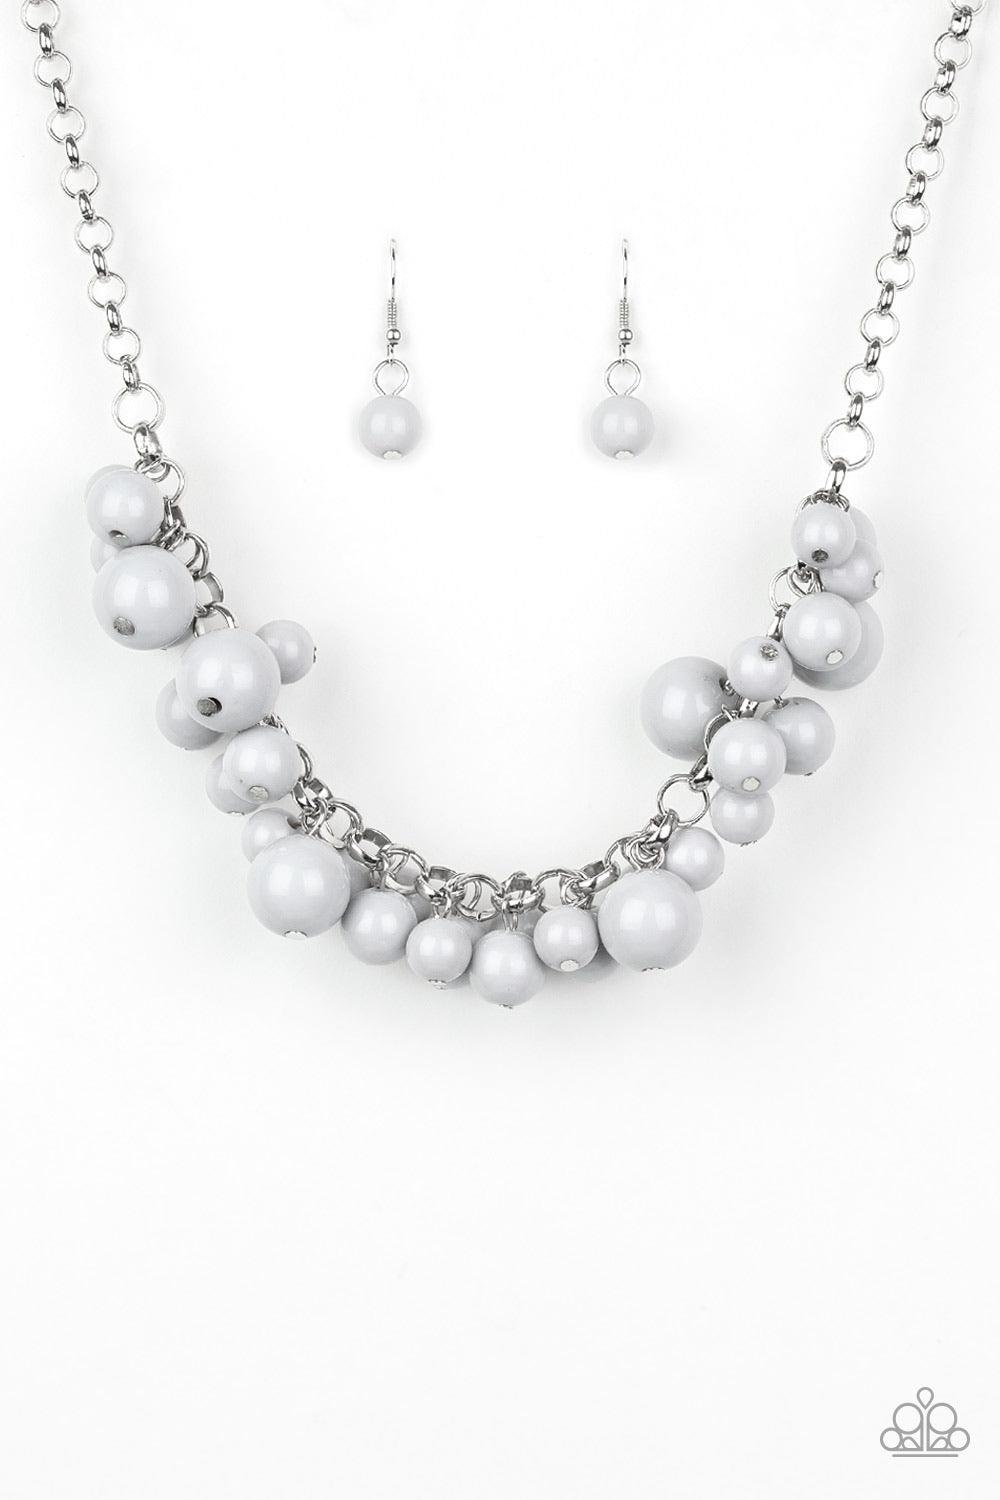 Walk This BROADWAY ~Silver - Beautifully Blinged